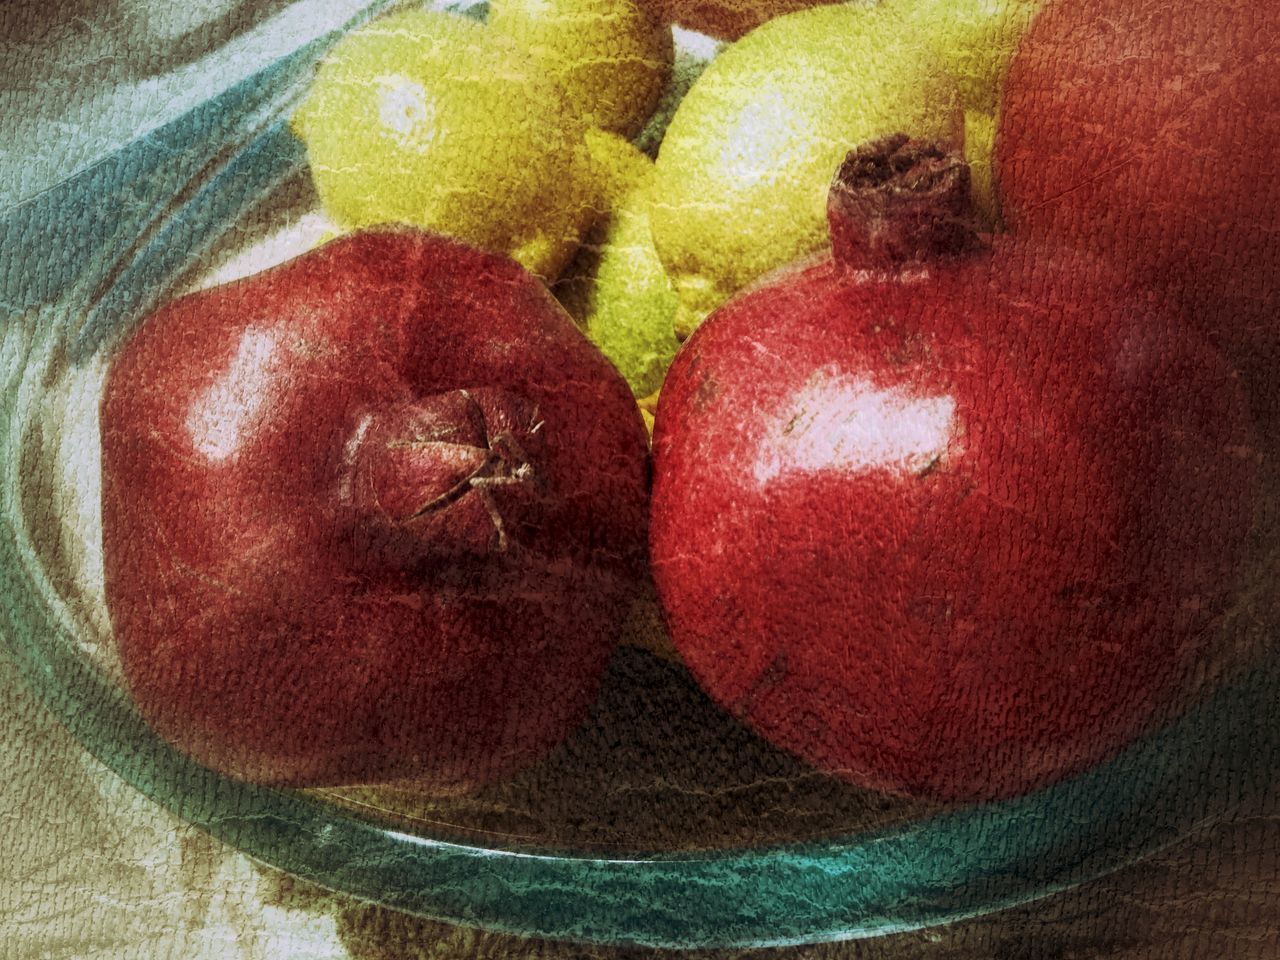 food and drink, close-up, fruit, healthy eating, food, red, indoors, no people, wellbeing, freshness, apple - fruit, still life, directly above, textile, high angle view, nature, pomegranate, group of objects, table, plant, ripe